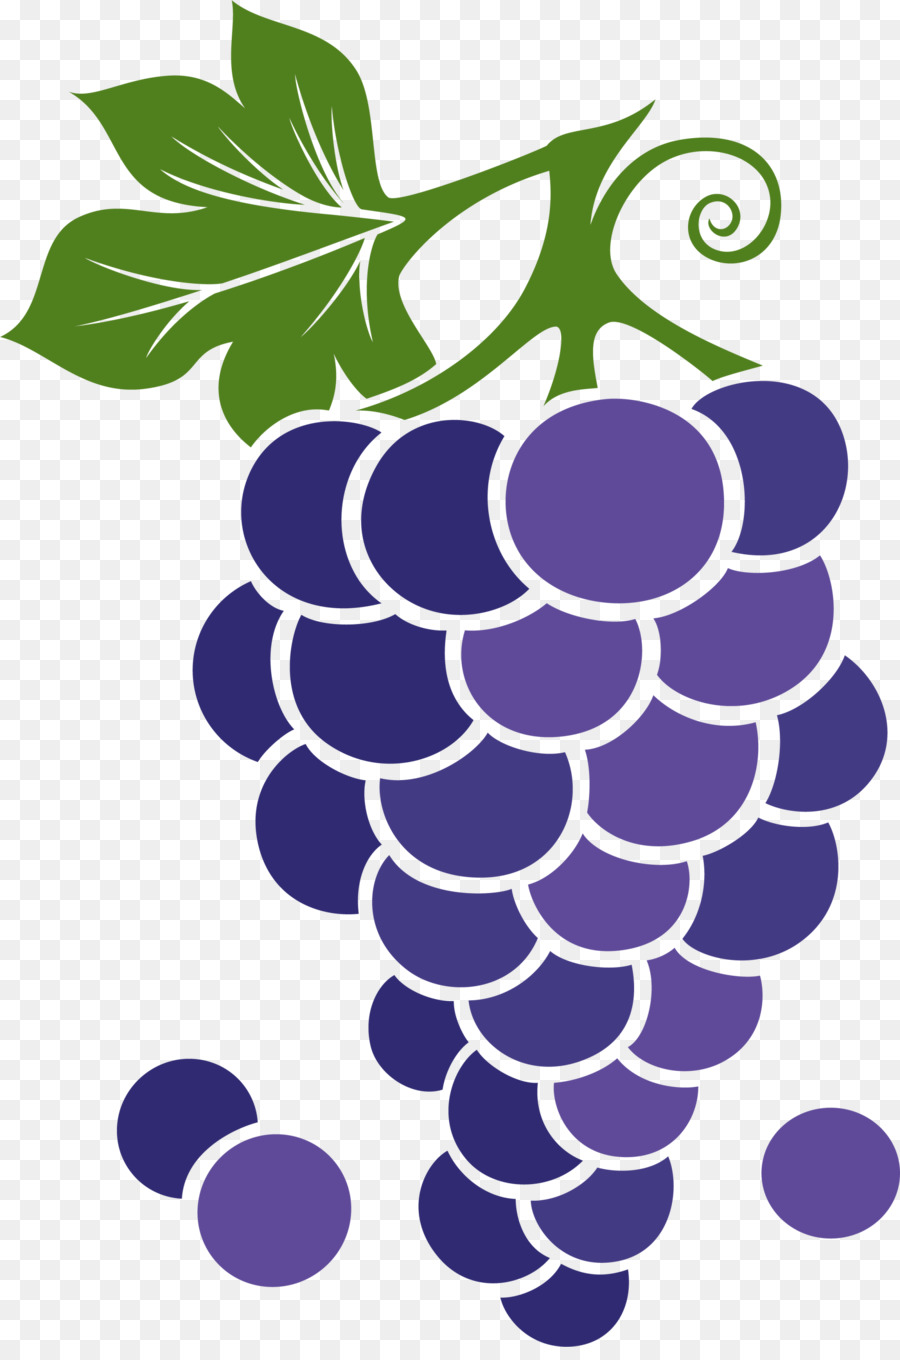 Grapes fresh fruit drawing icon Royalty Free Vector Image